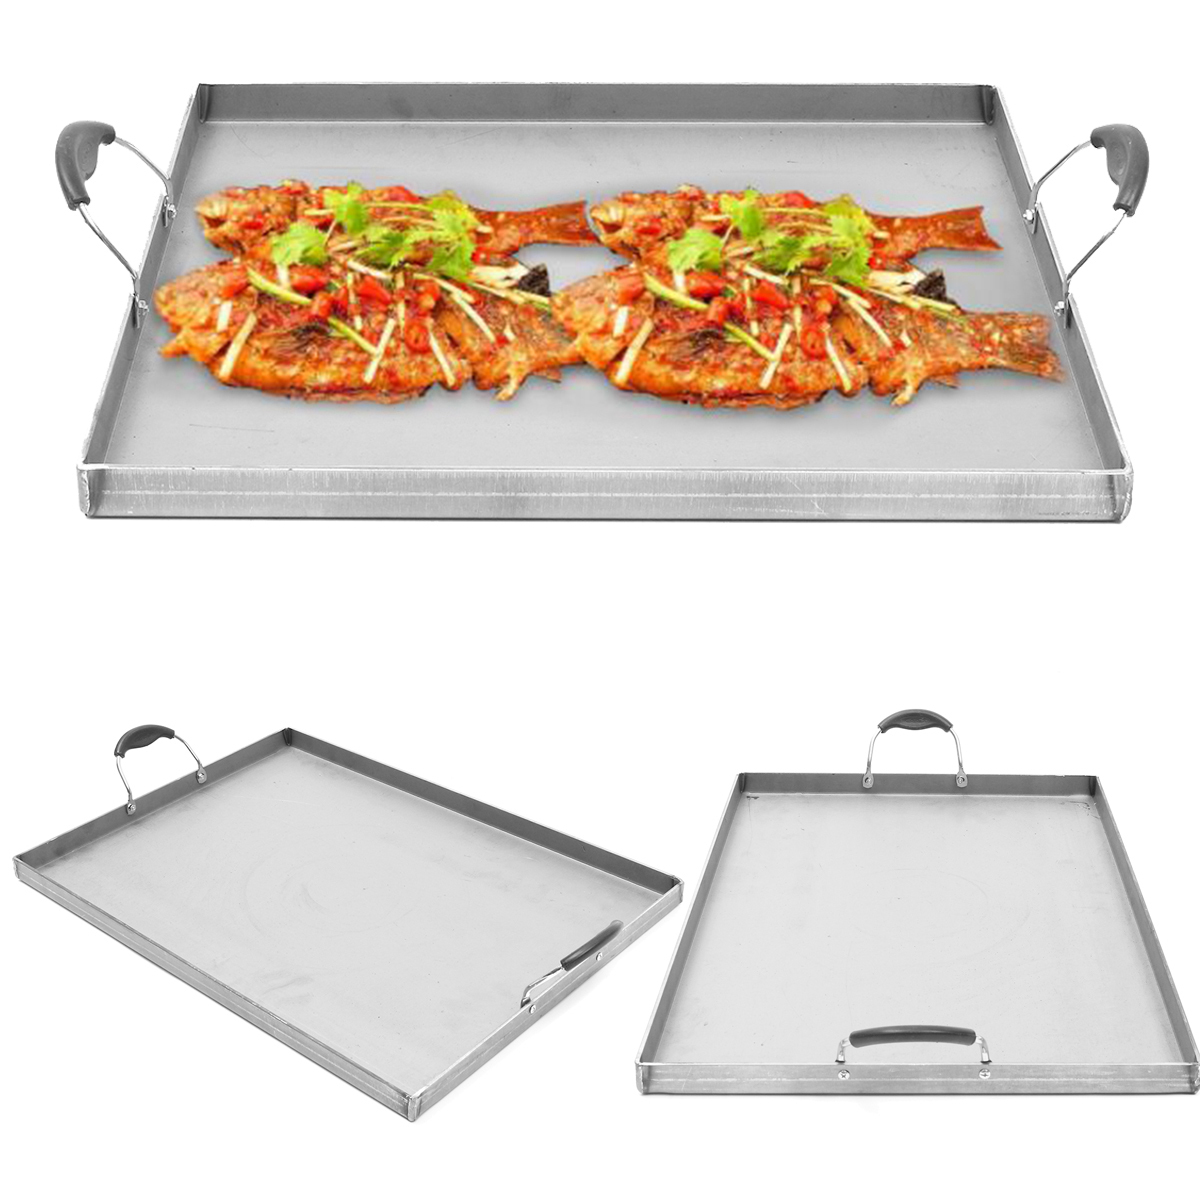 Stainless Steel Griddle Flat Top Cooking BBQ Grill Heat Distribution Stoves 2